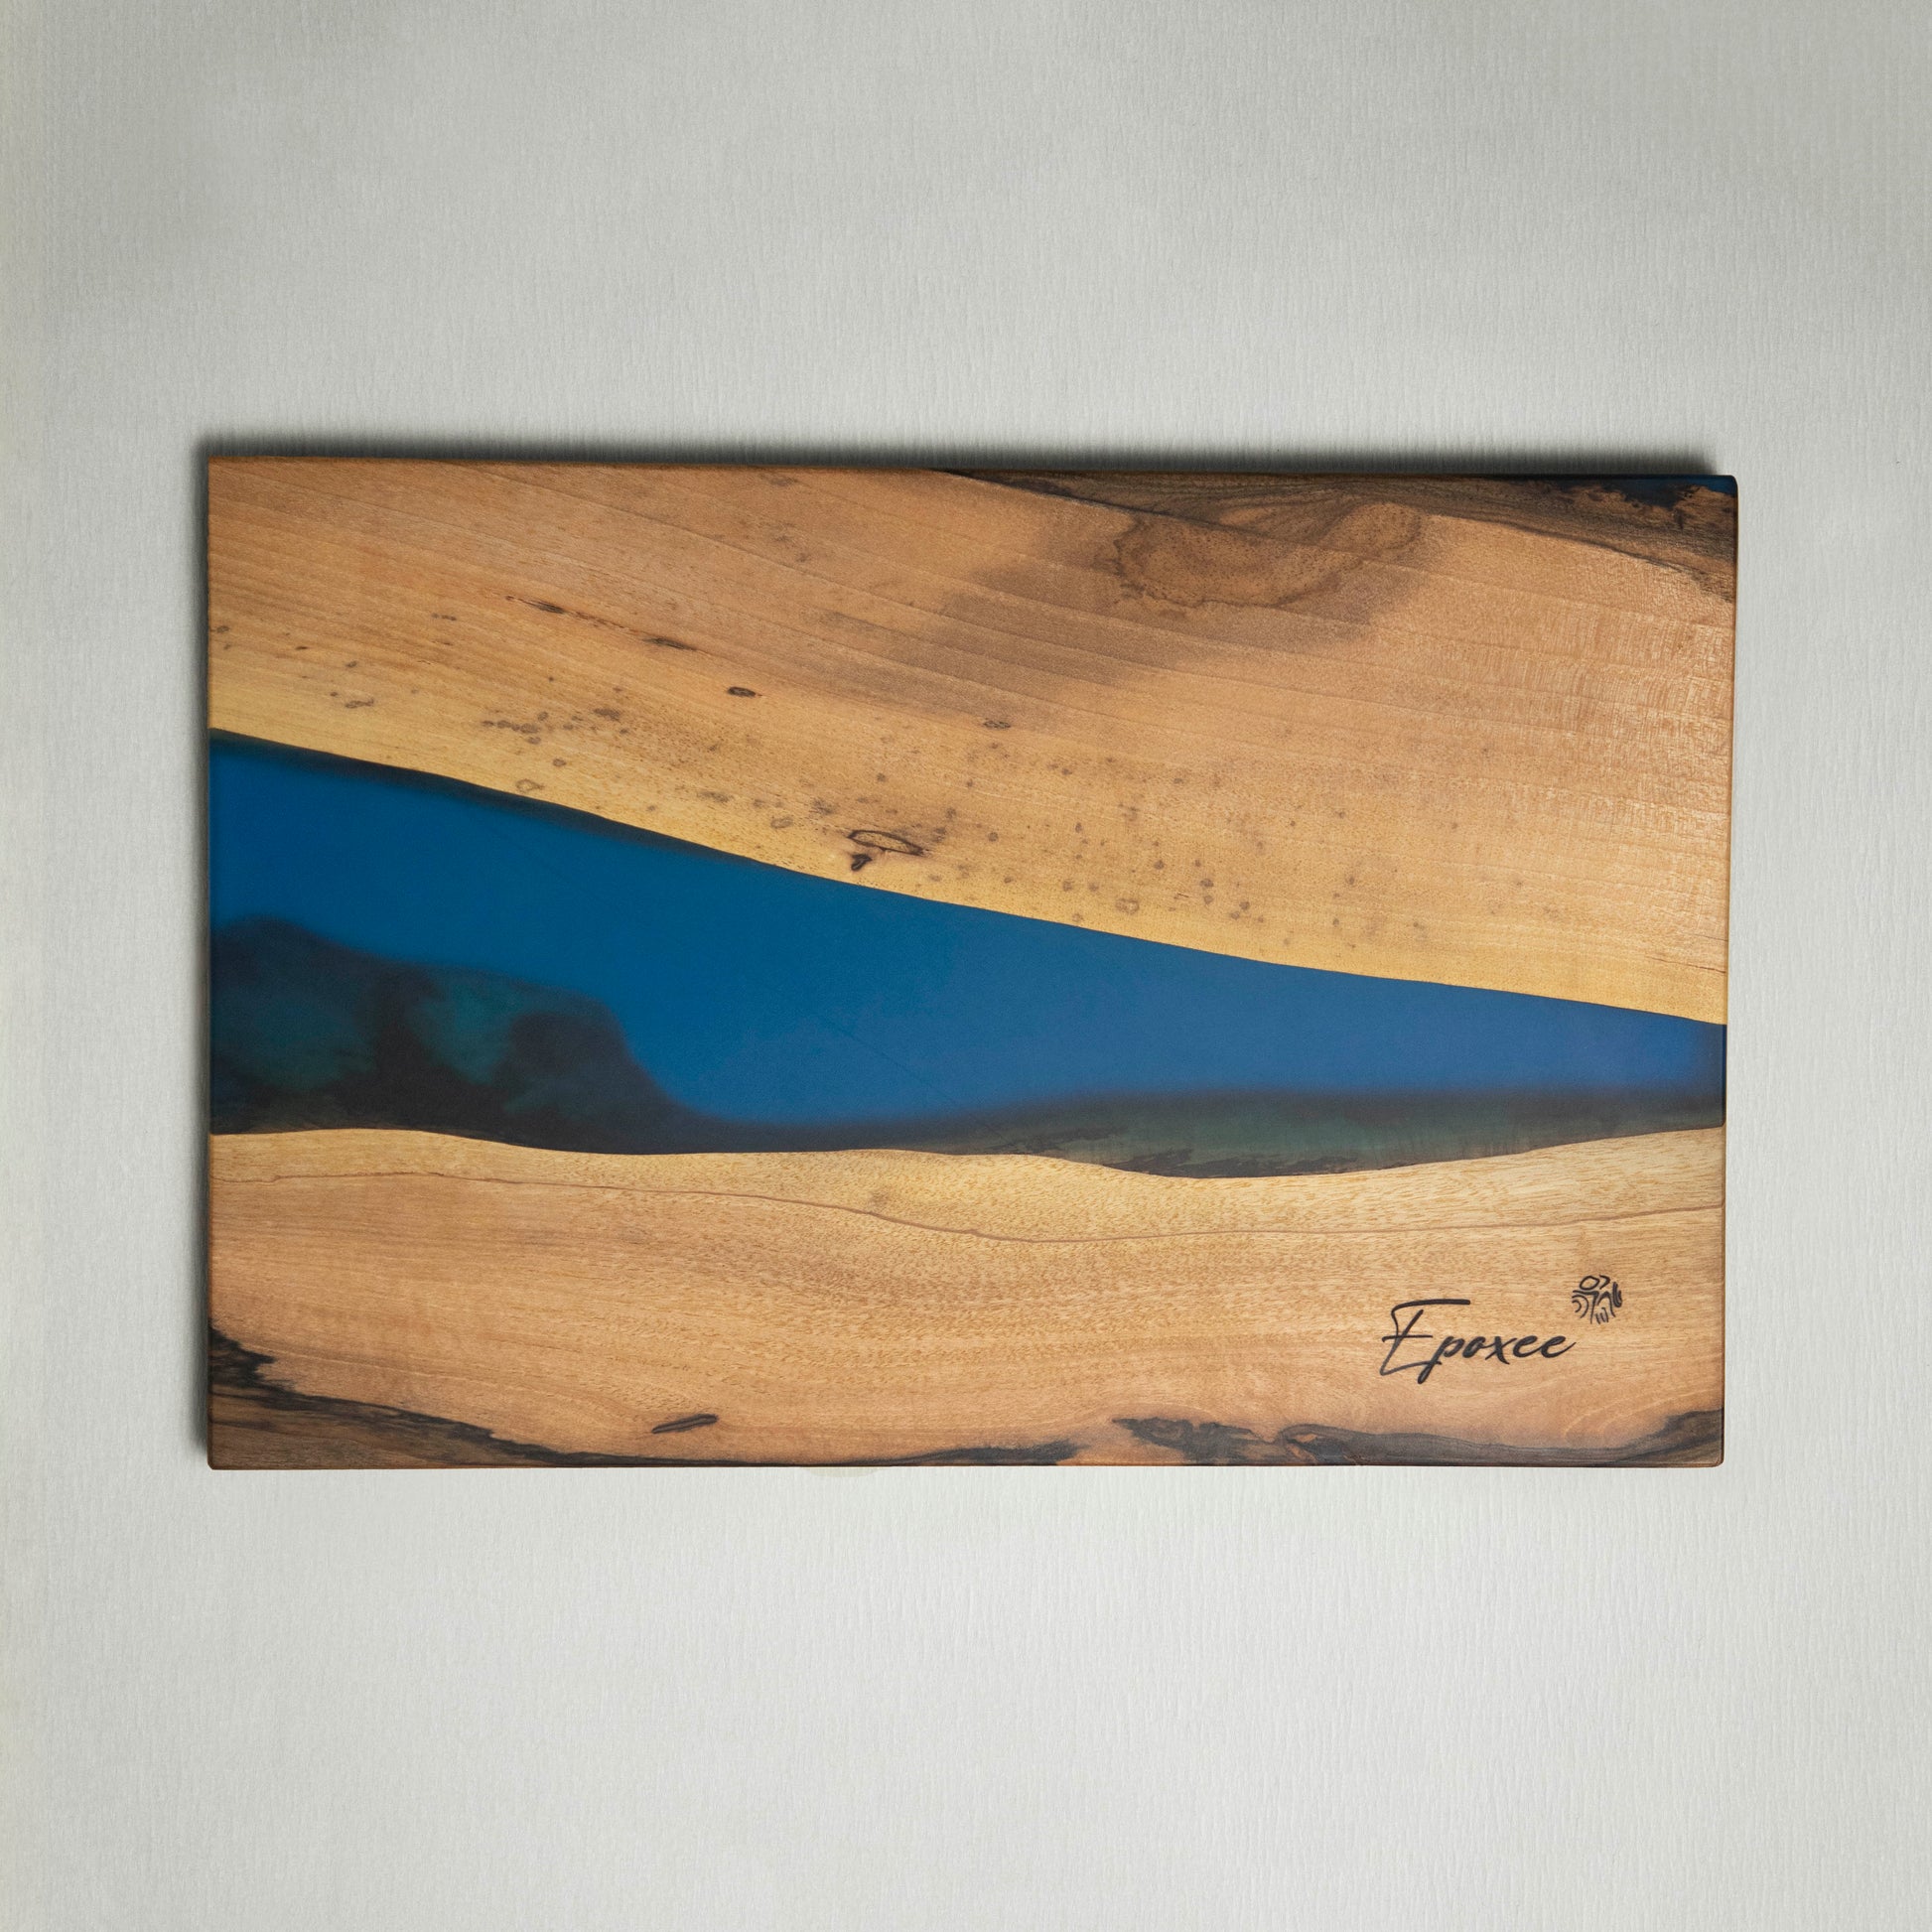 Serving board made from wood and epoxy resin in the color navy blue